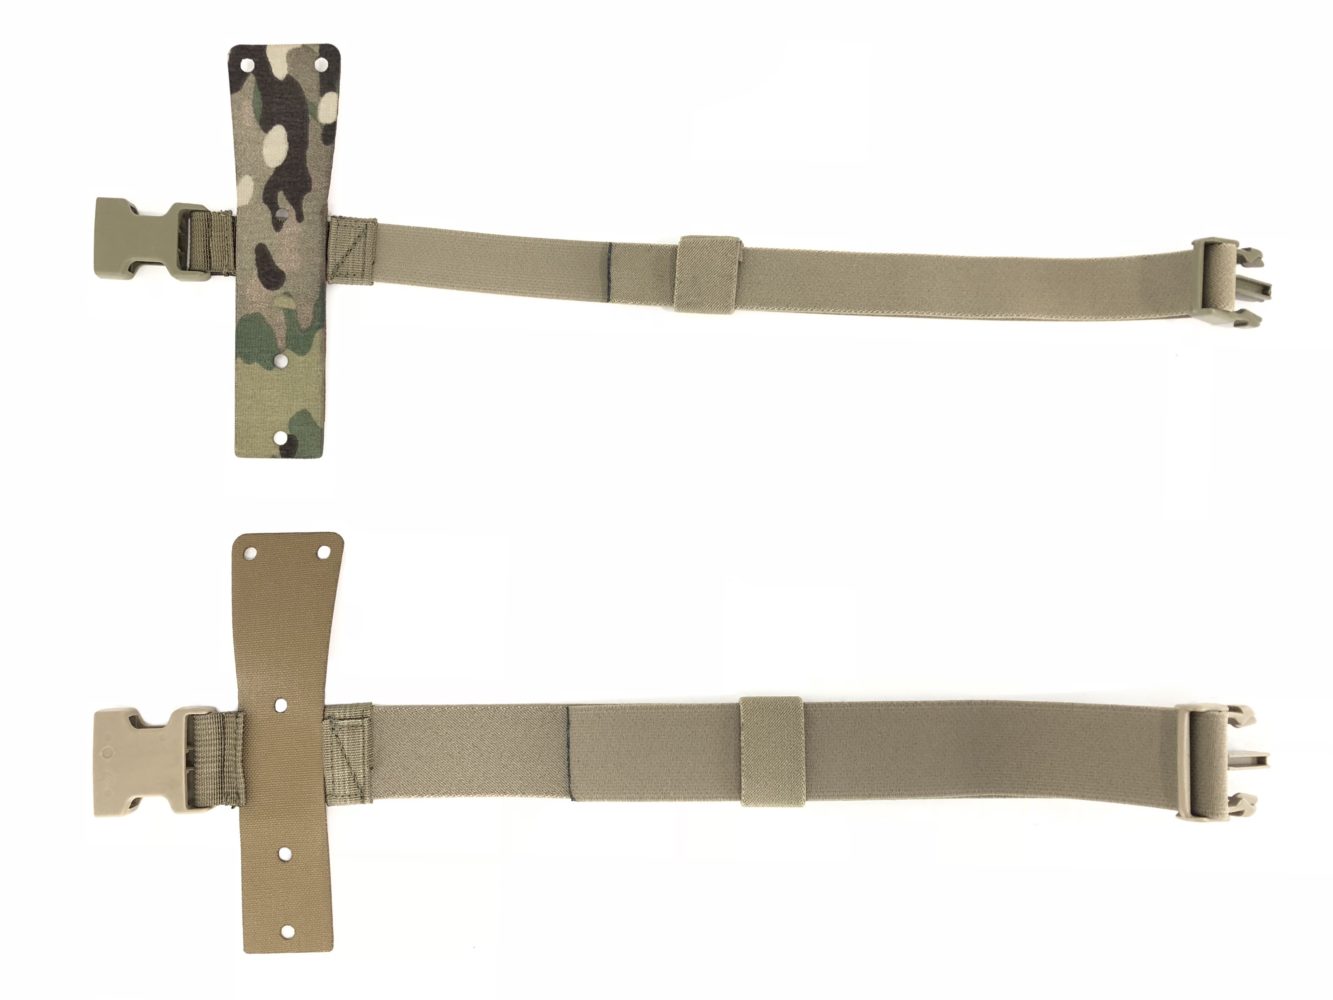 Safariland Holster Single Leg Strap Adapter, Here's an overview of the  installation, tips, tricks, and advantages of using the Arbor Arms  Safariland Holster Single Leg Strap Adapter.